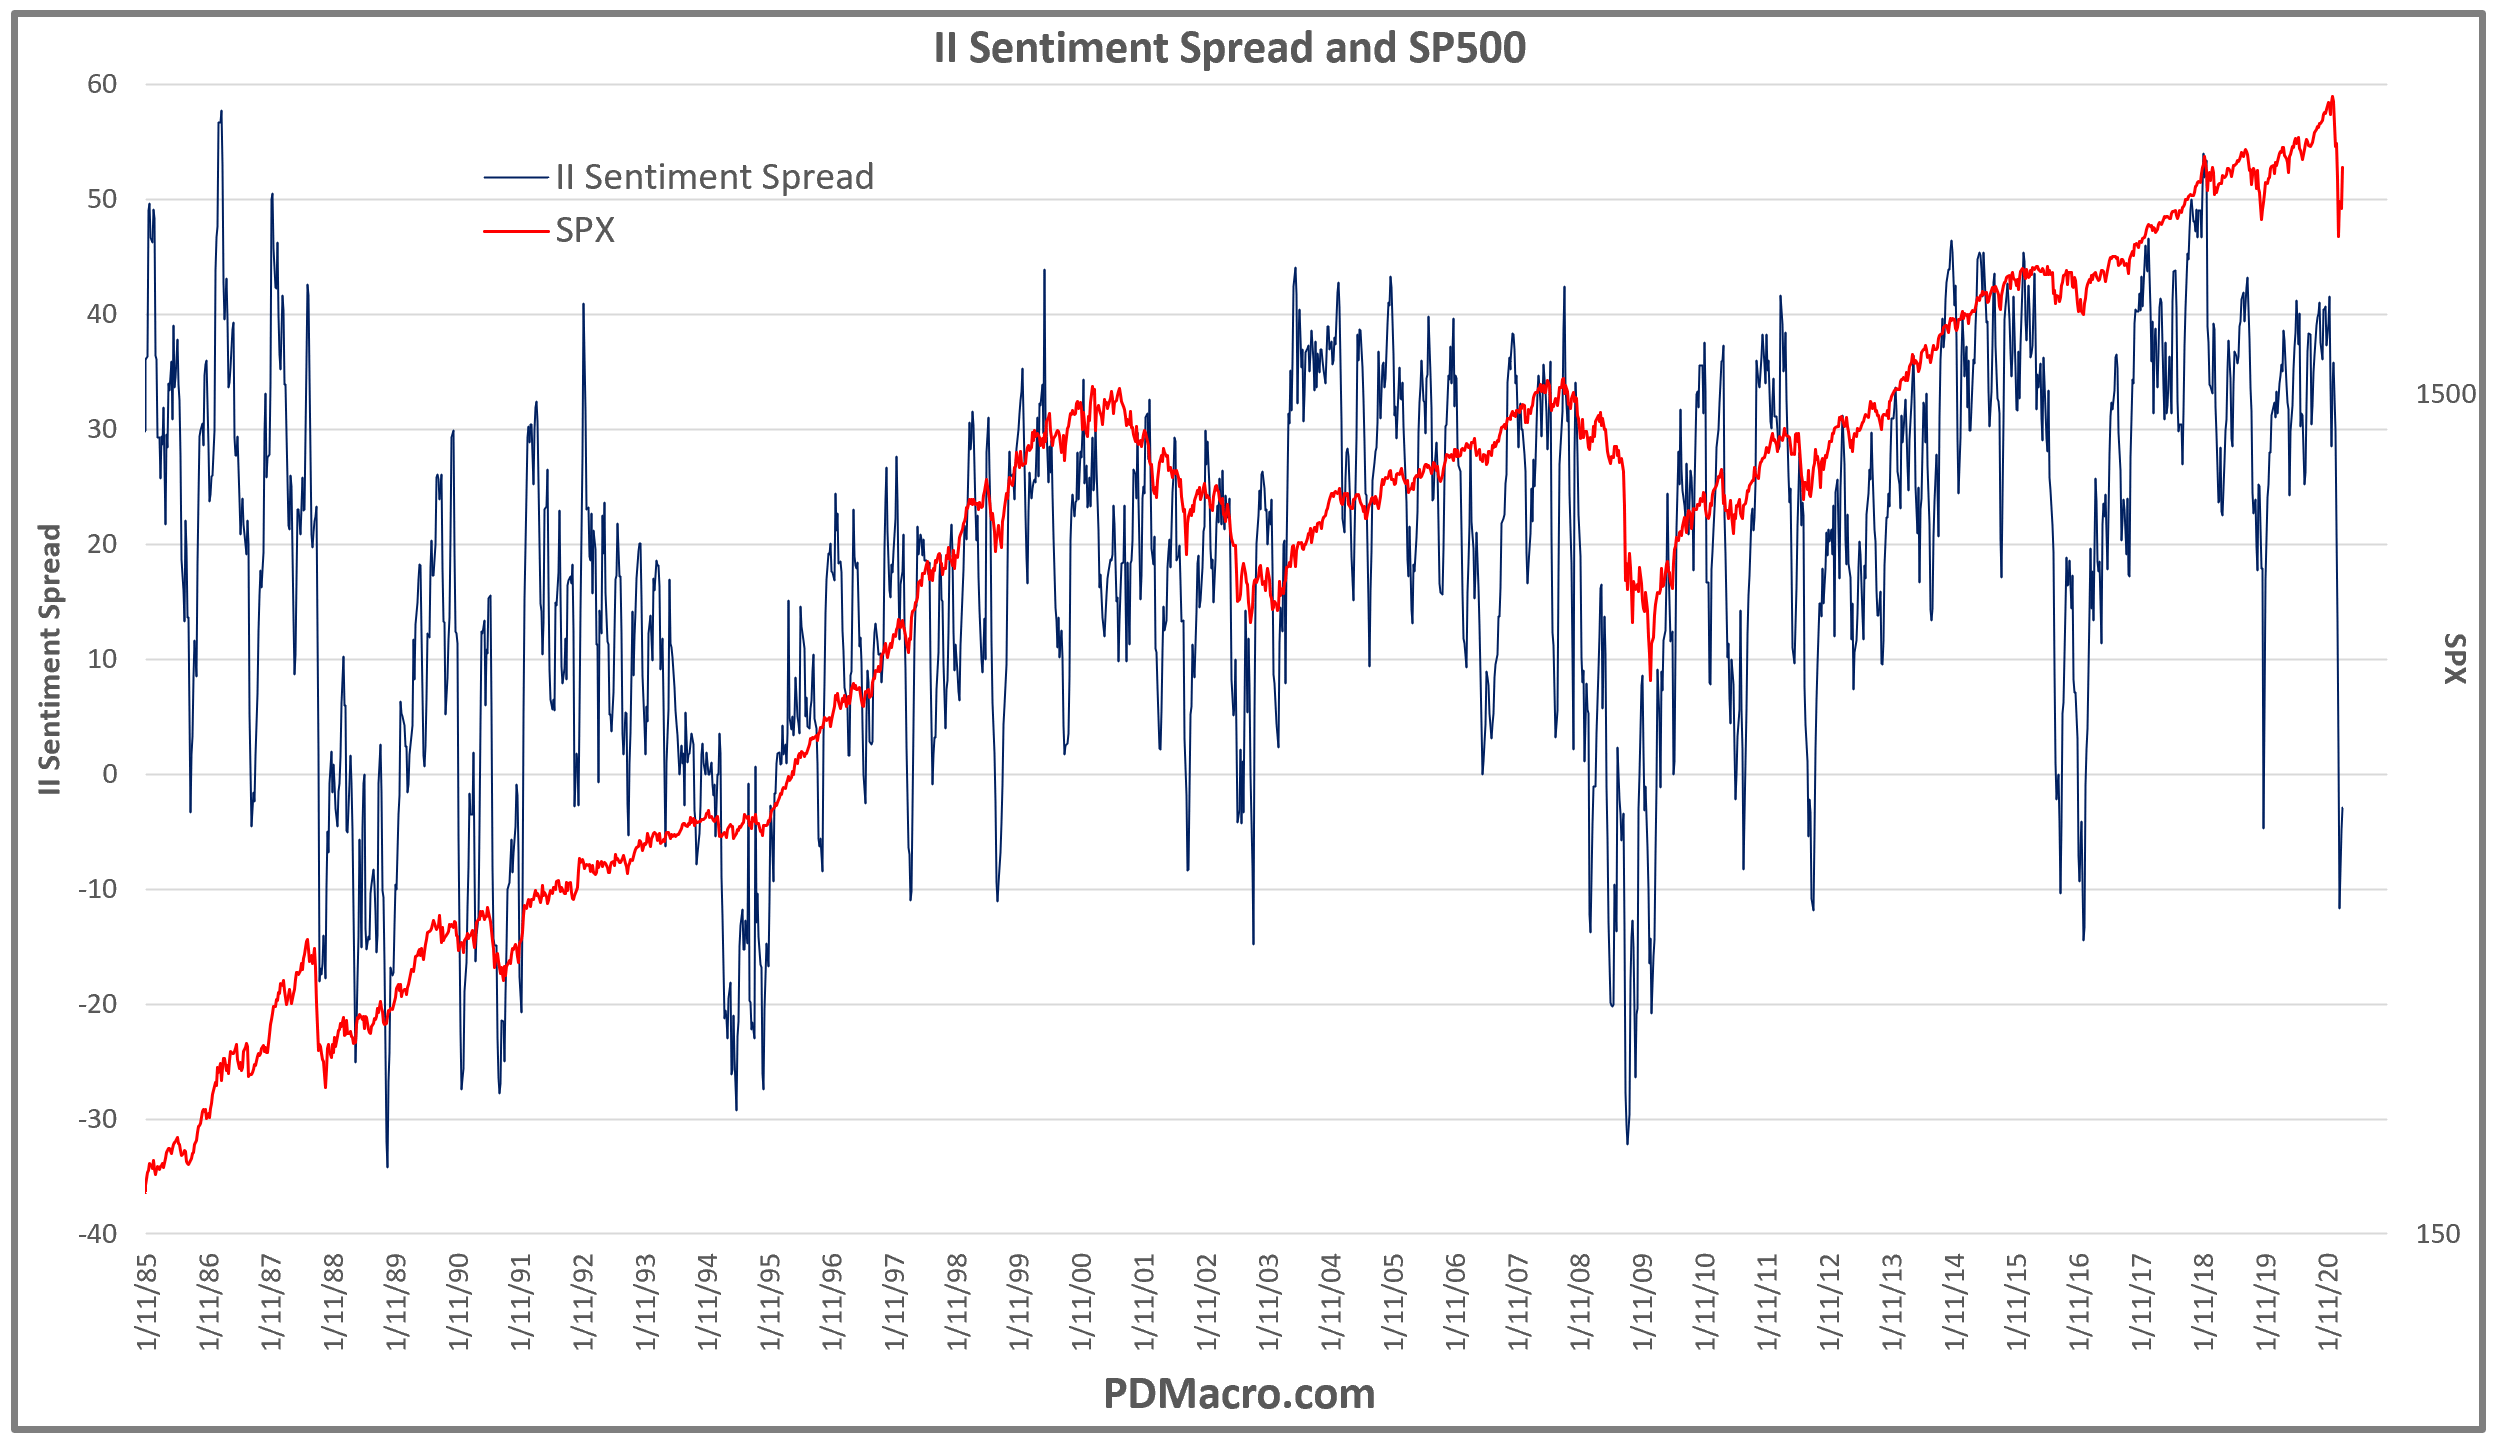 II Sentiment Spread and SP500